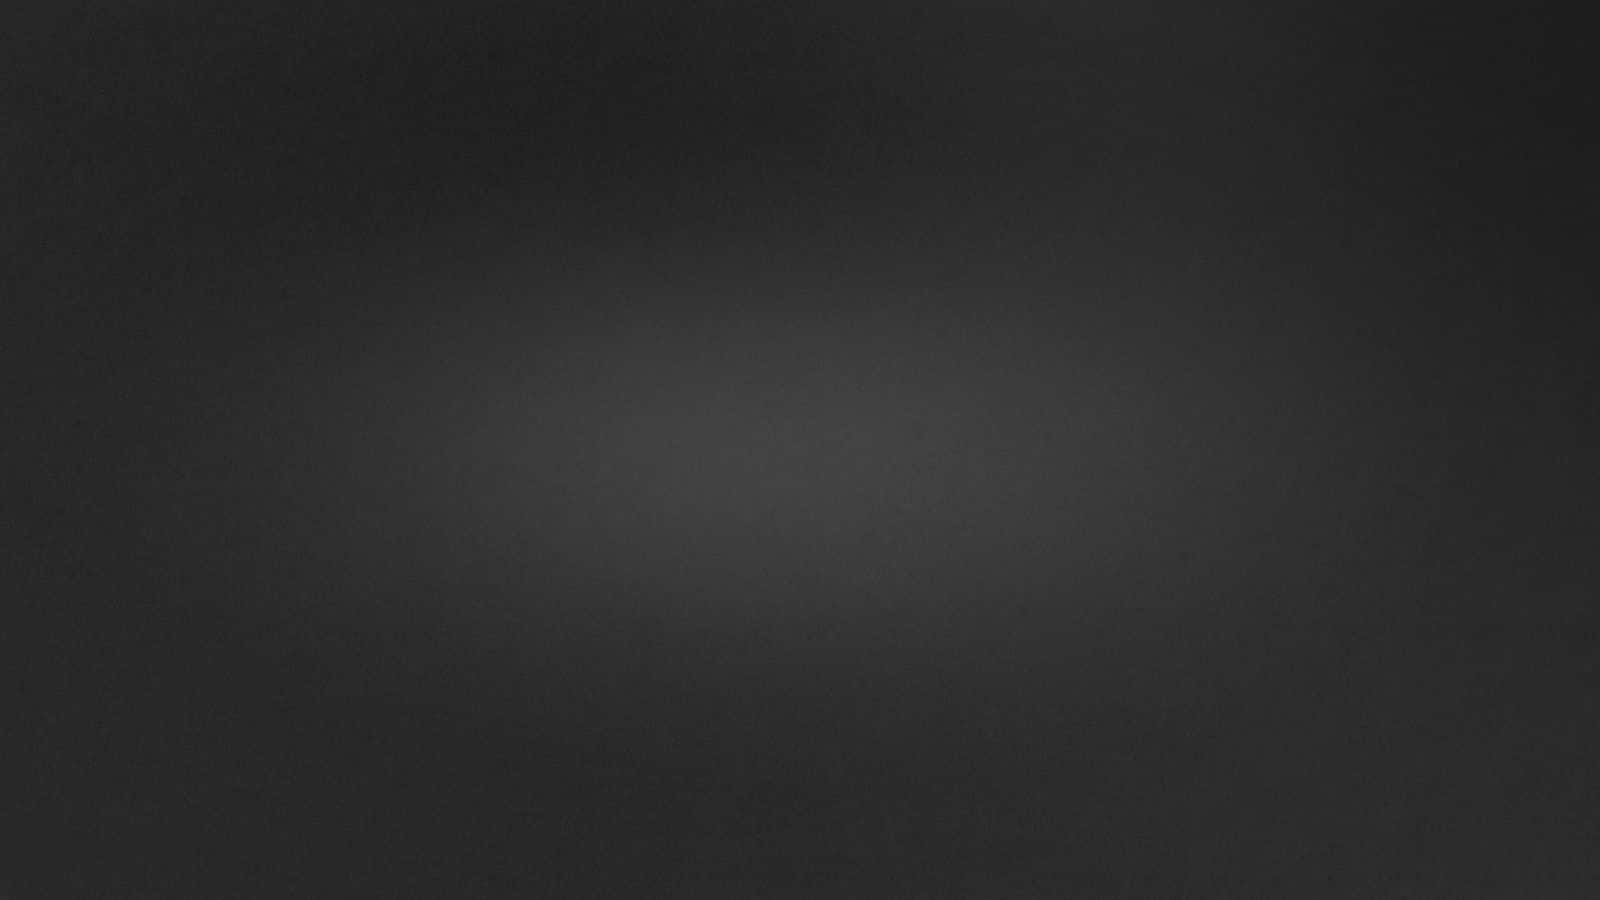 A Black Background With A White Square